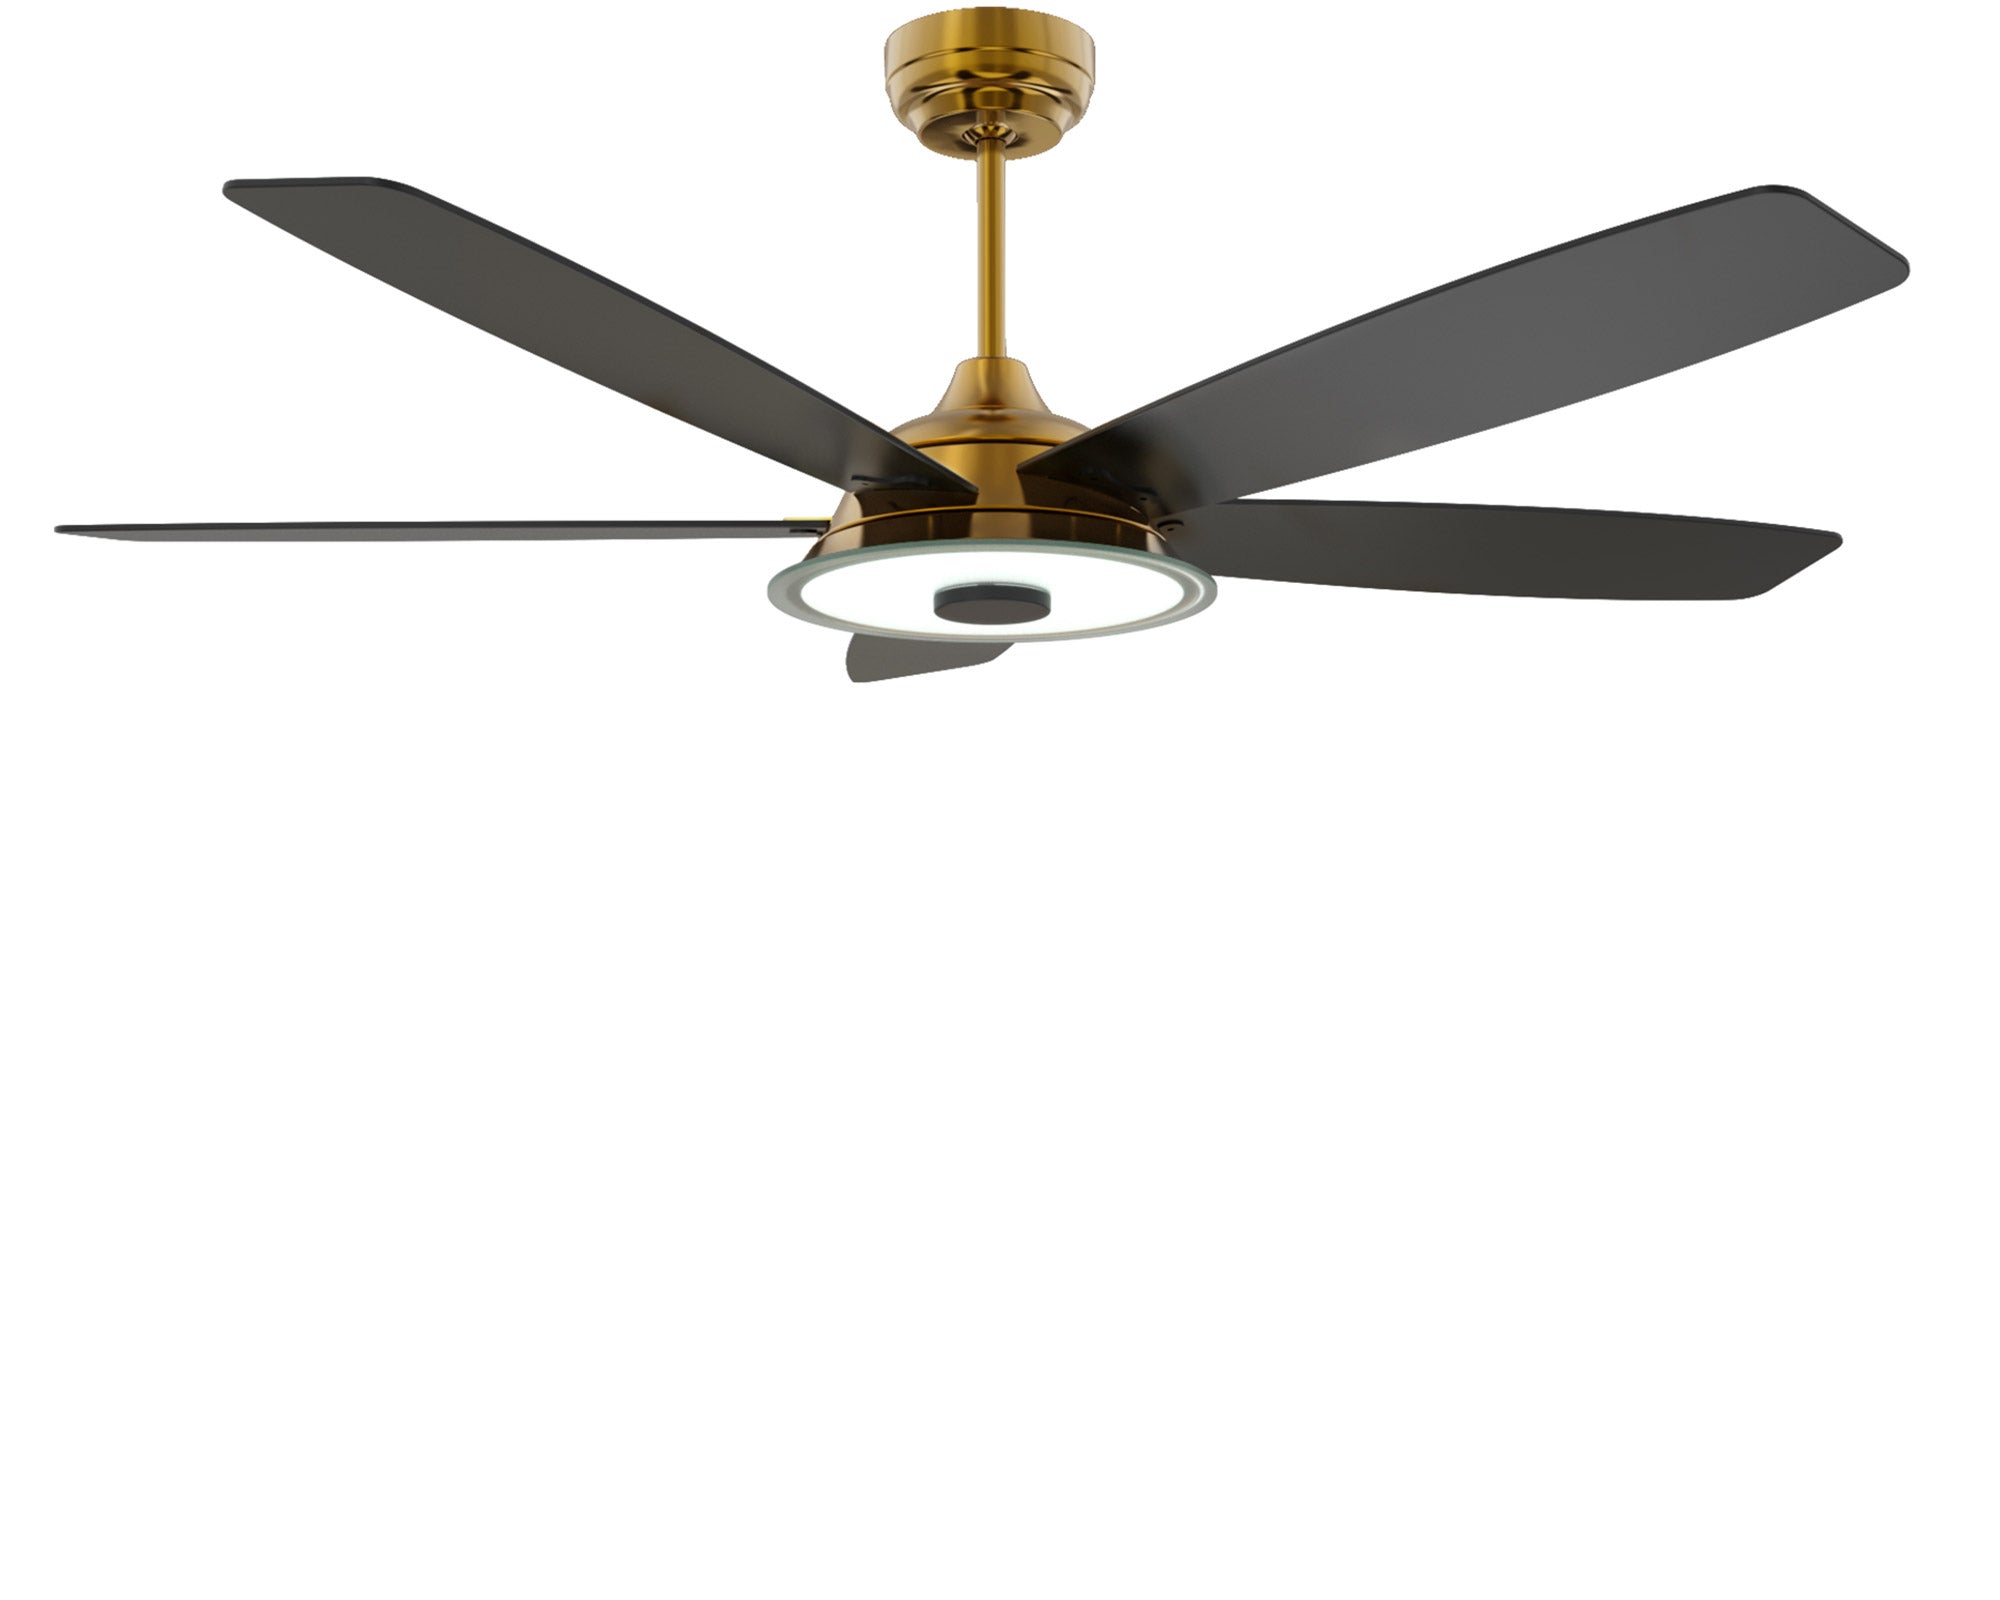 Smafan-Striker-56-Indoor-Outdoor-Ceiling-Fan-with-LED-Light-Kit-Works-with-Google-Assistant-CLEARANCE